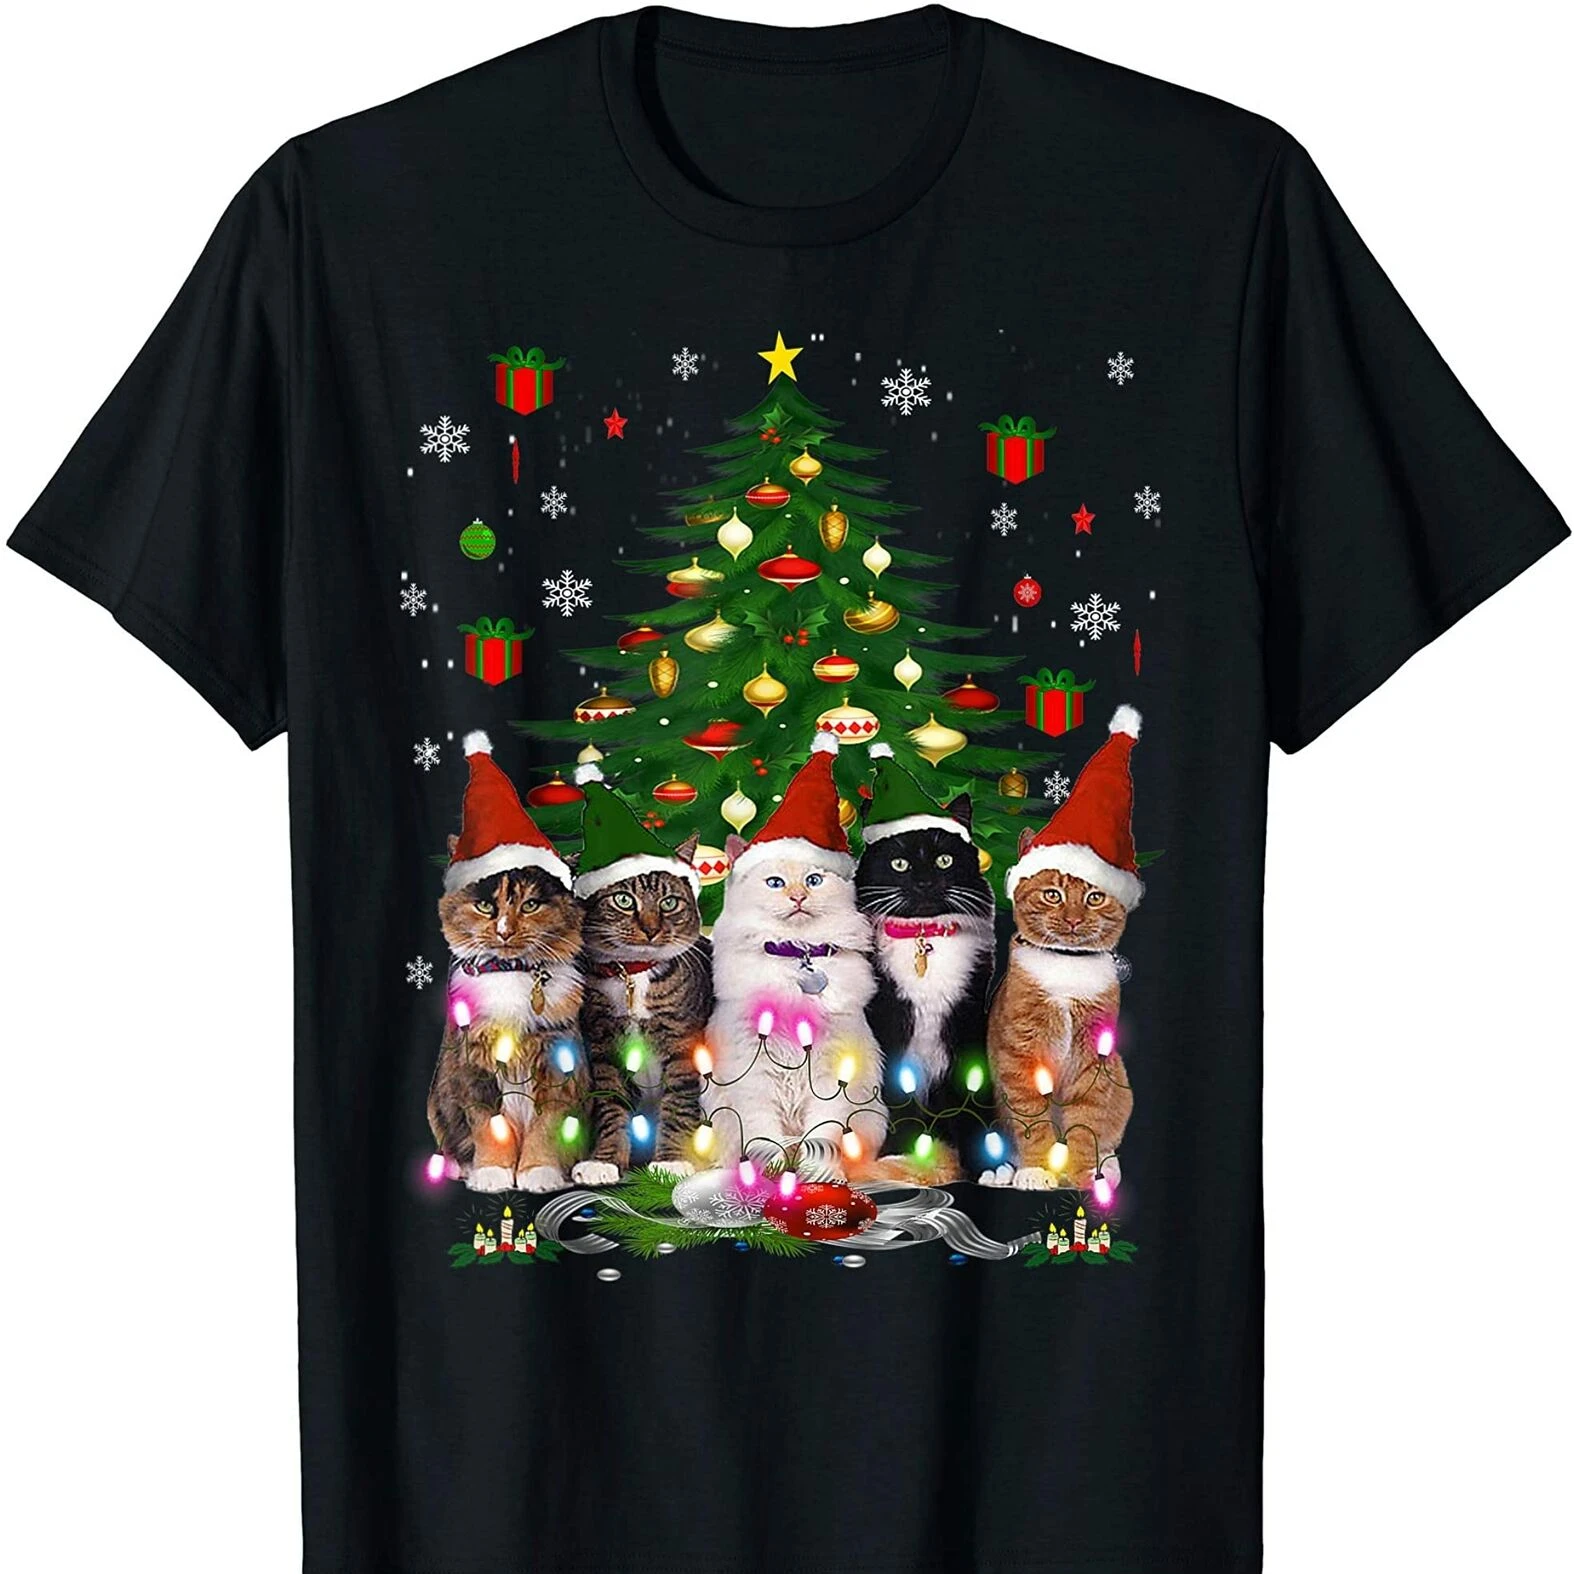 

Funny Meowy Cat Christmas Tree Pet Cat Lovers Xmas Gift T Shirt. Short Sleeve 100% Cotton Casual T-shirts Loose Top Size S-3XL